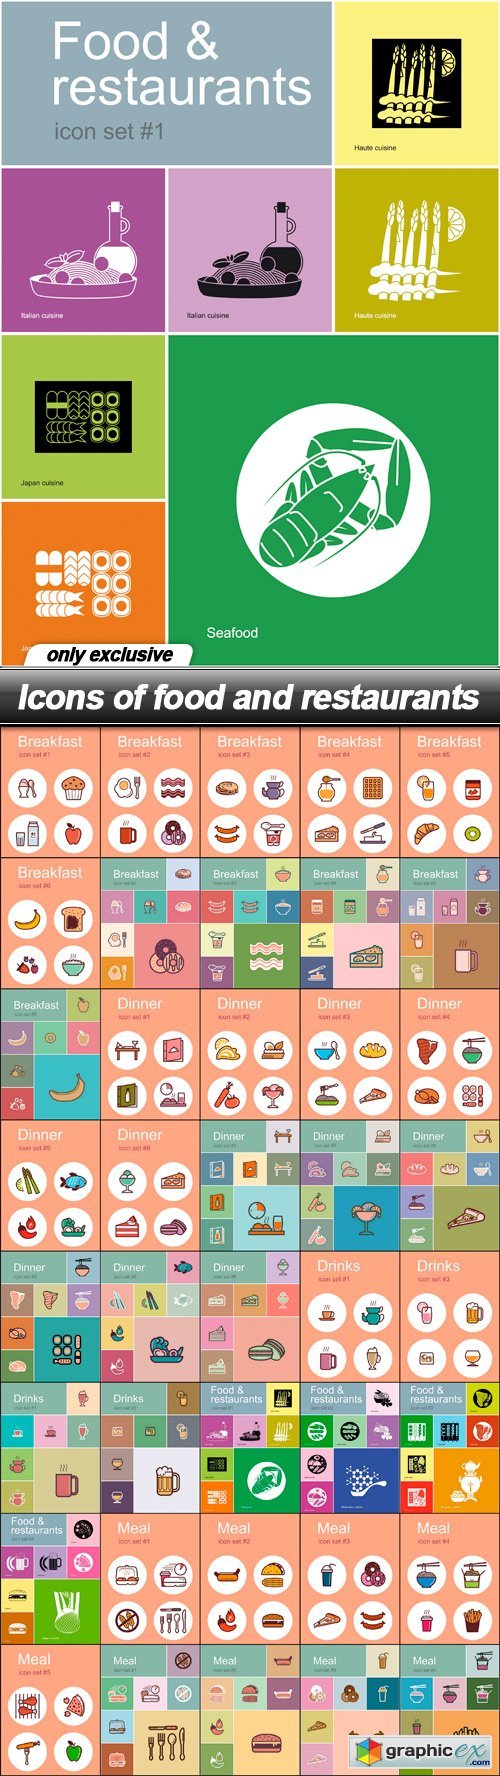 Icons of food and restaurants - 40 EPS